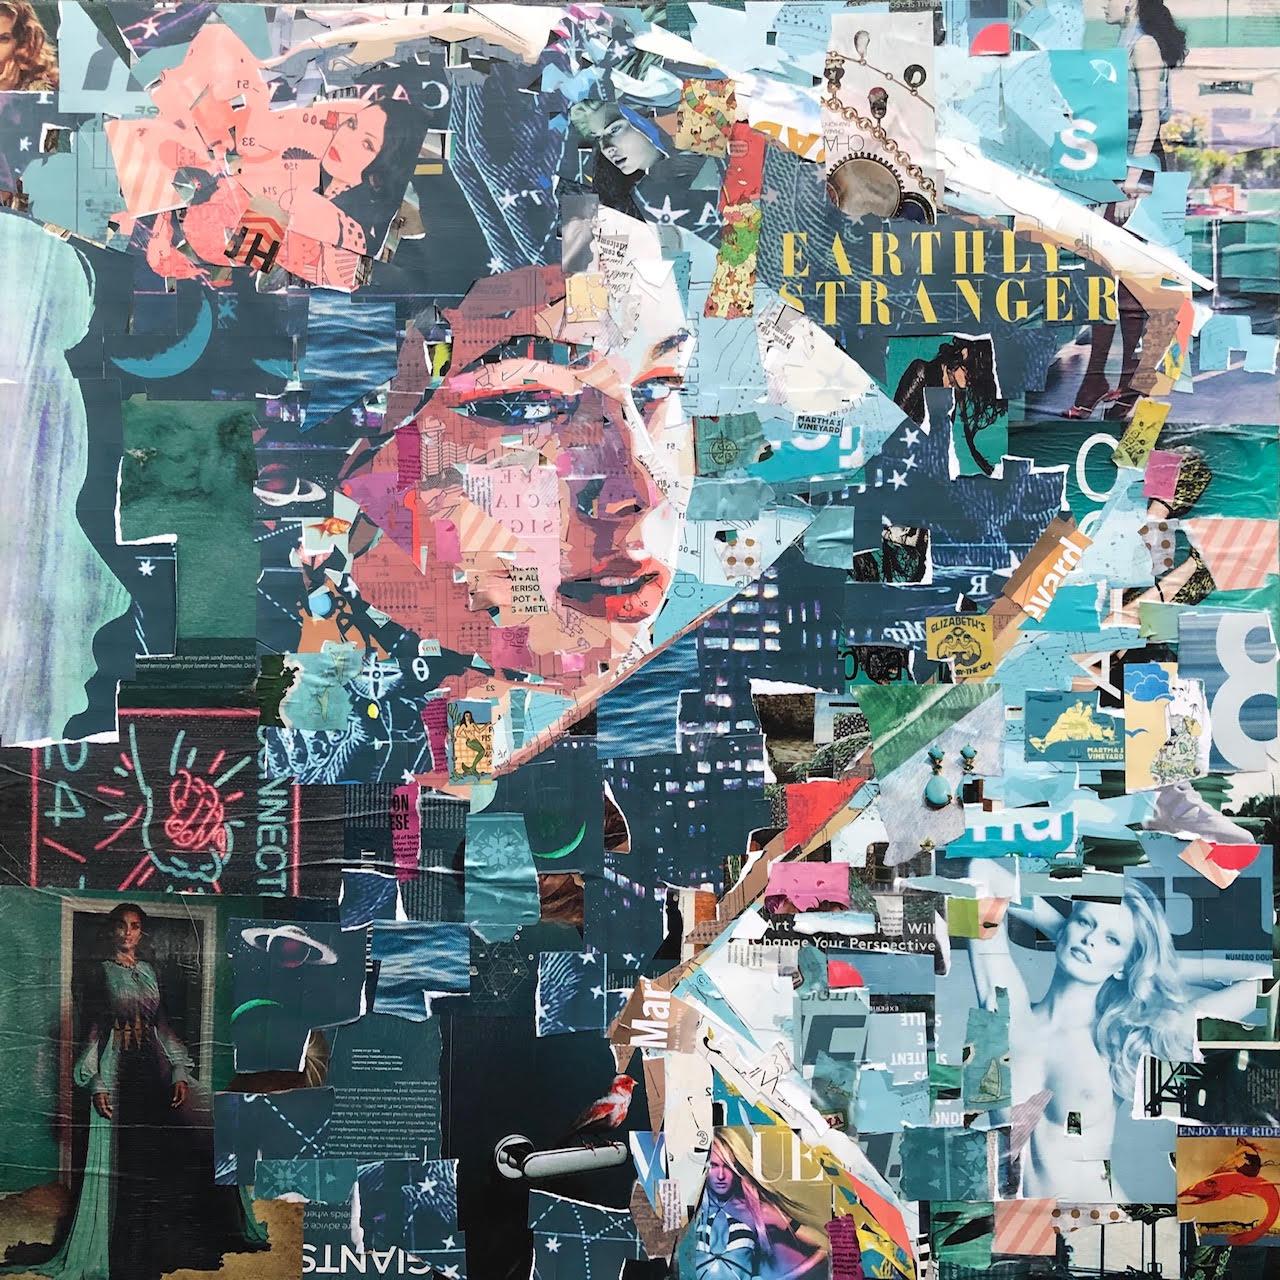 "Earthly Stranger" collage of a woman in turquoise and pinks - Mixed Media Art by Derek Gores